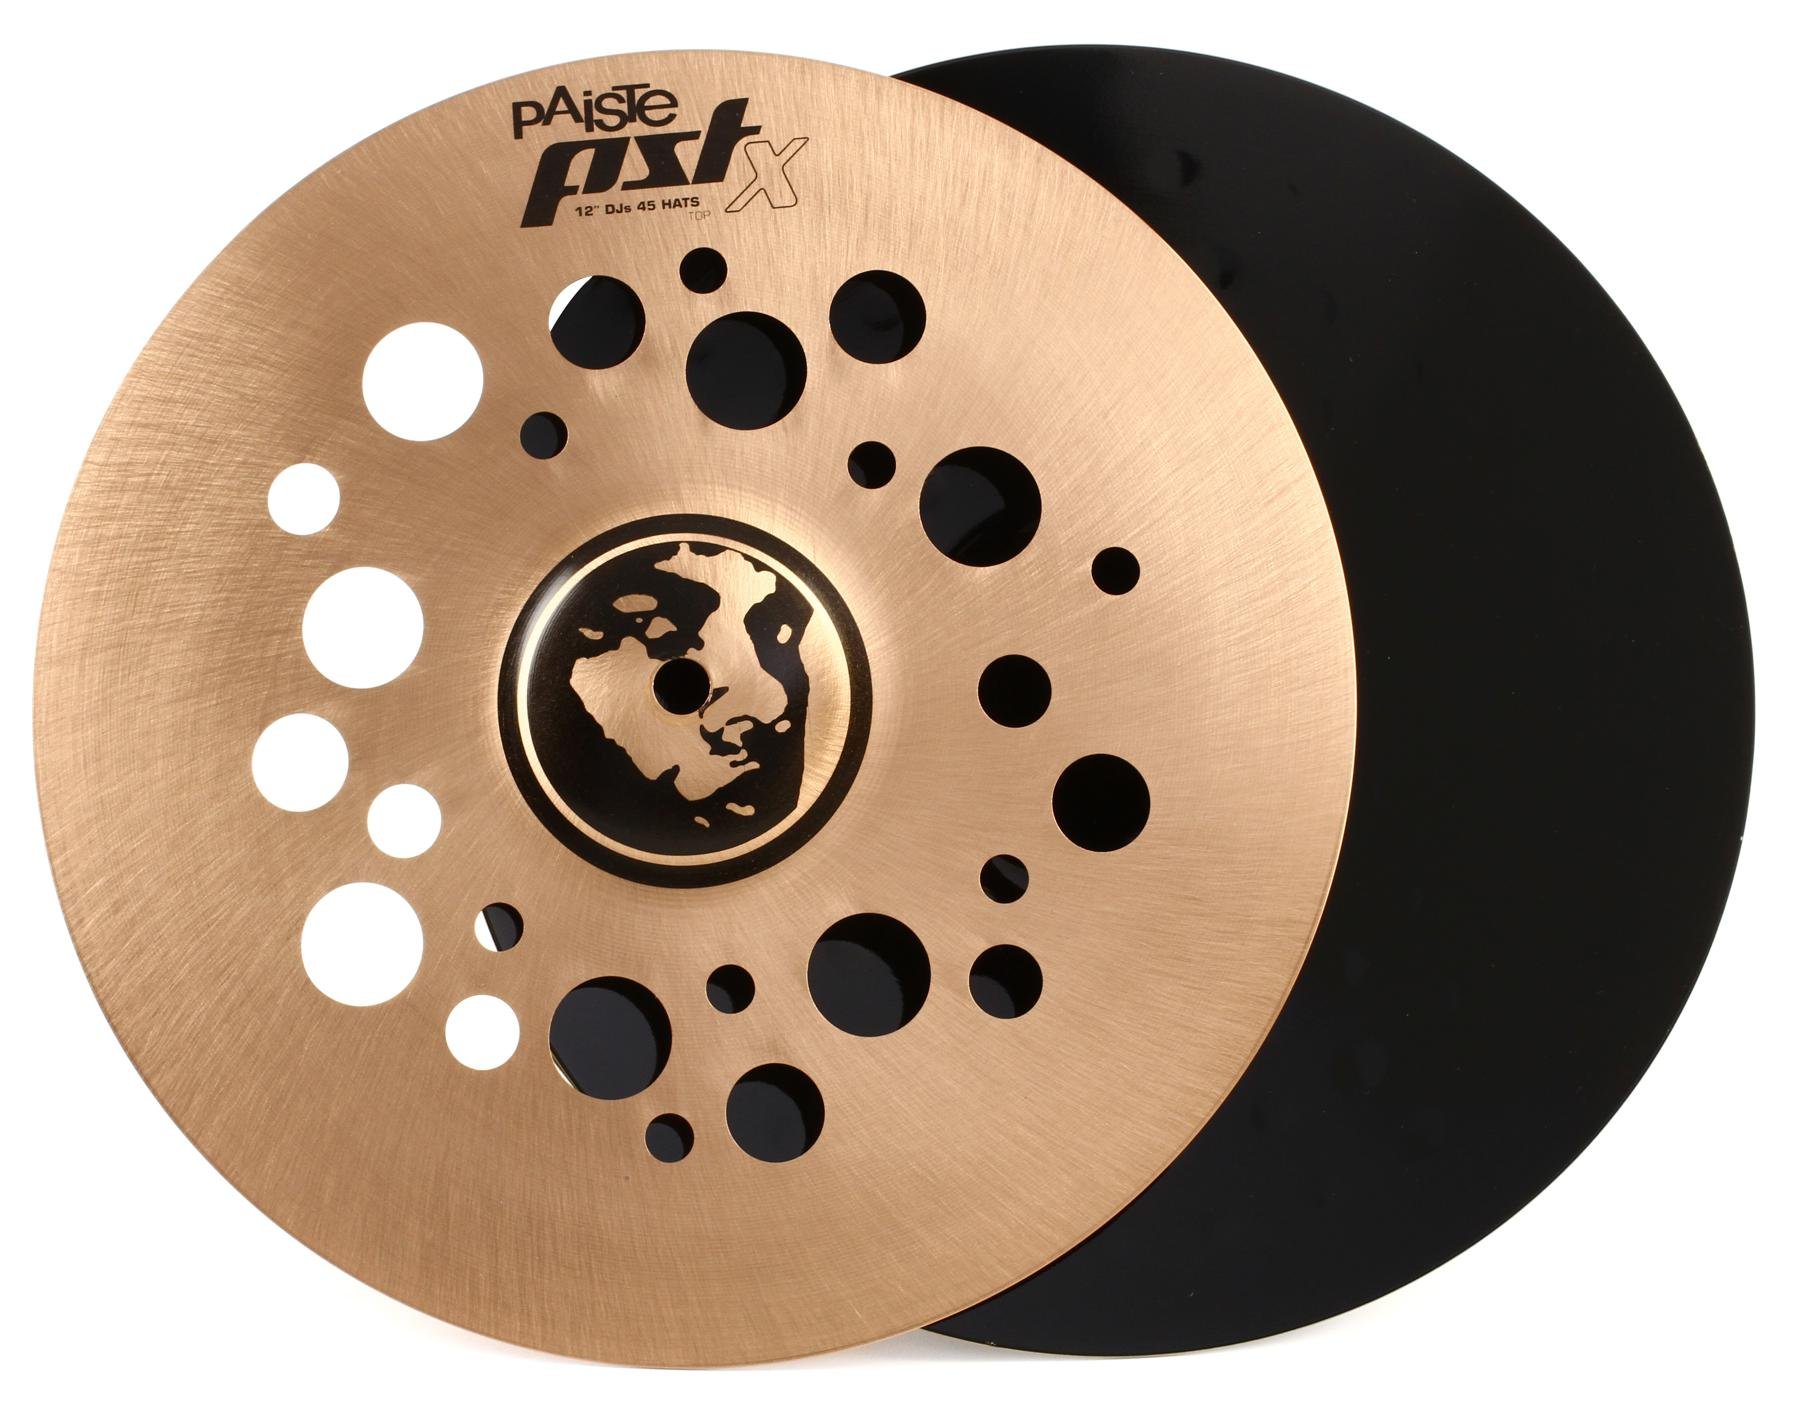 Tinkertory 18 High Quality Copper Alloy Golden Ride Cymbal 